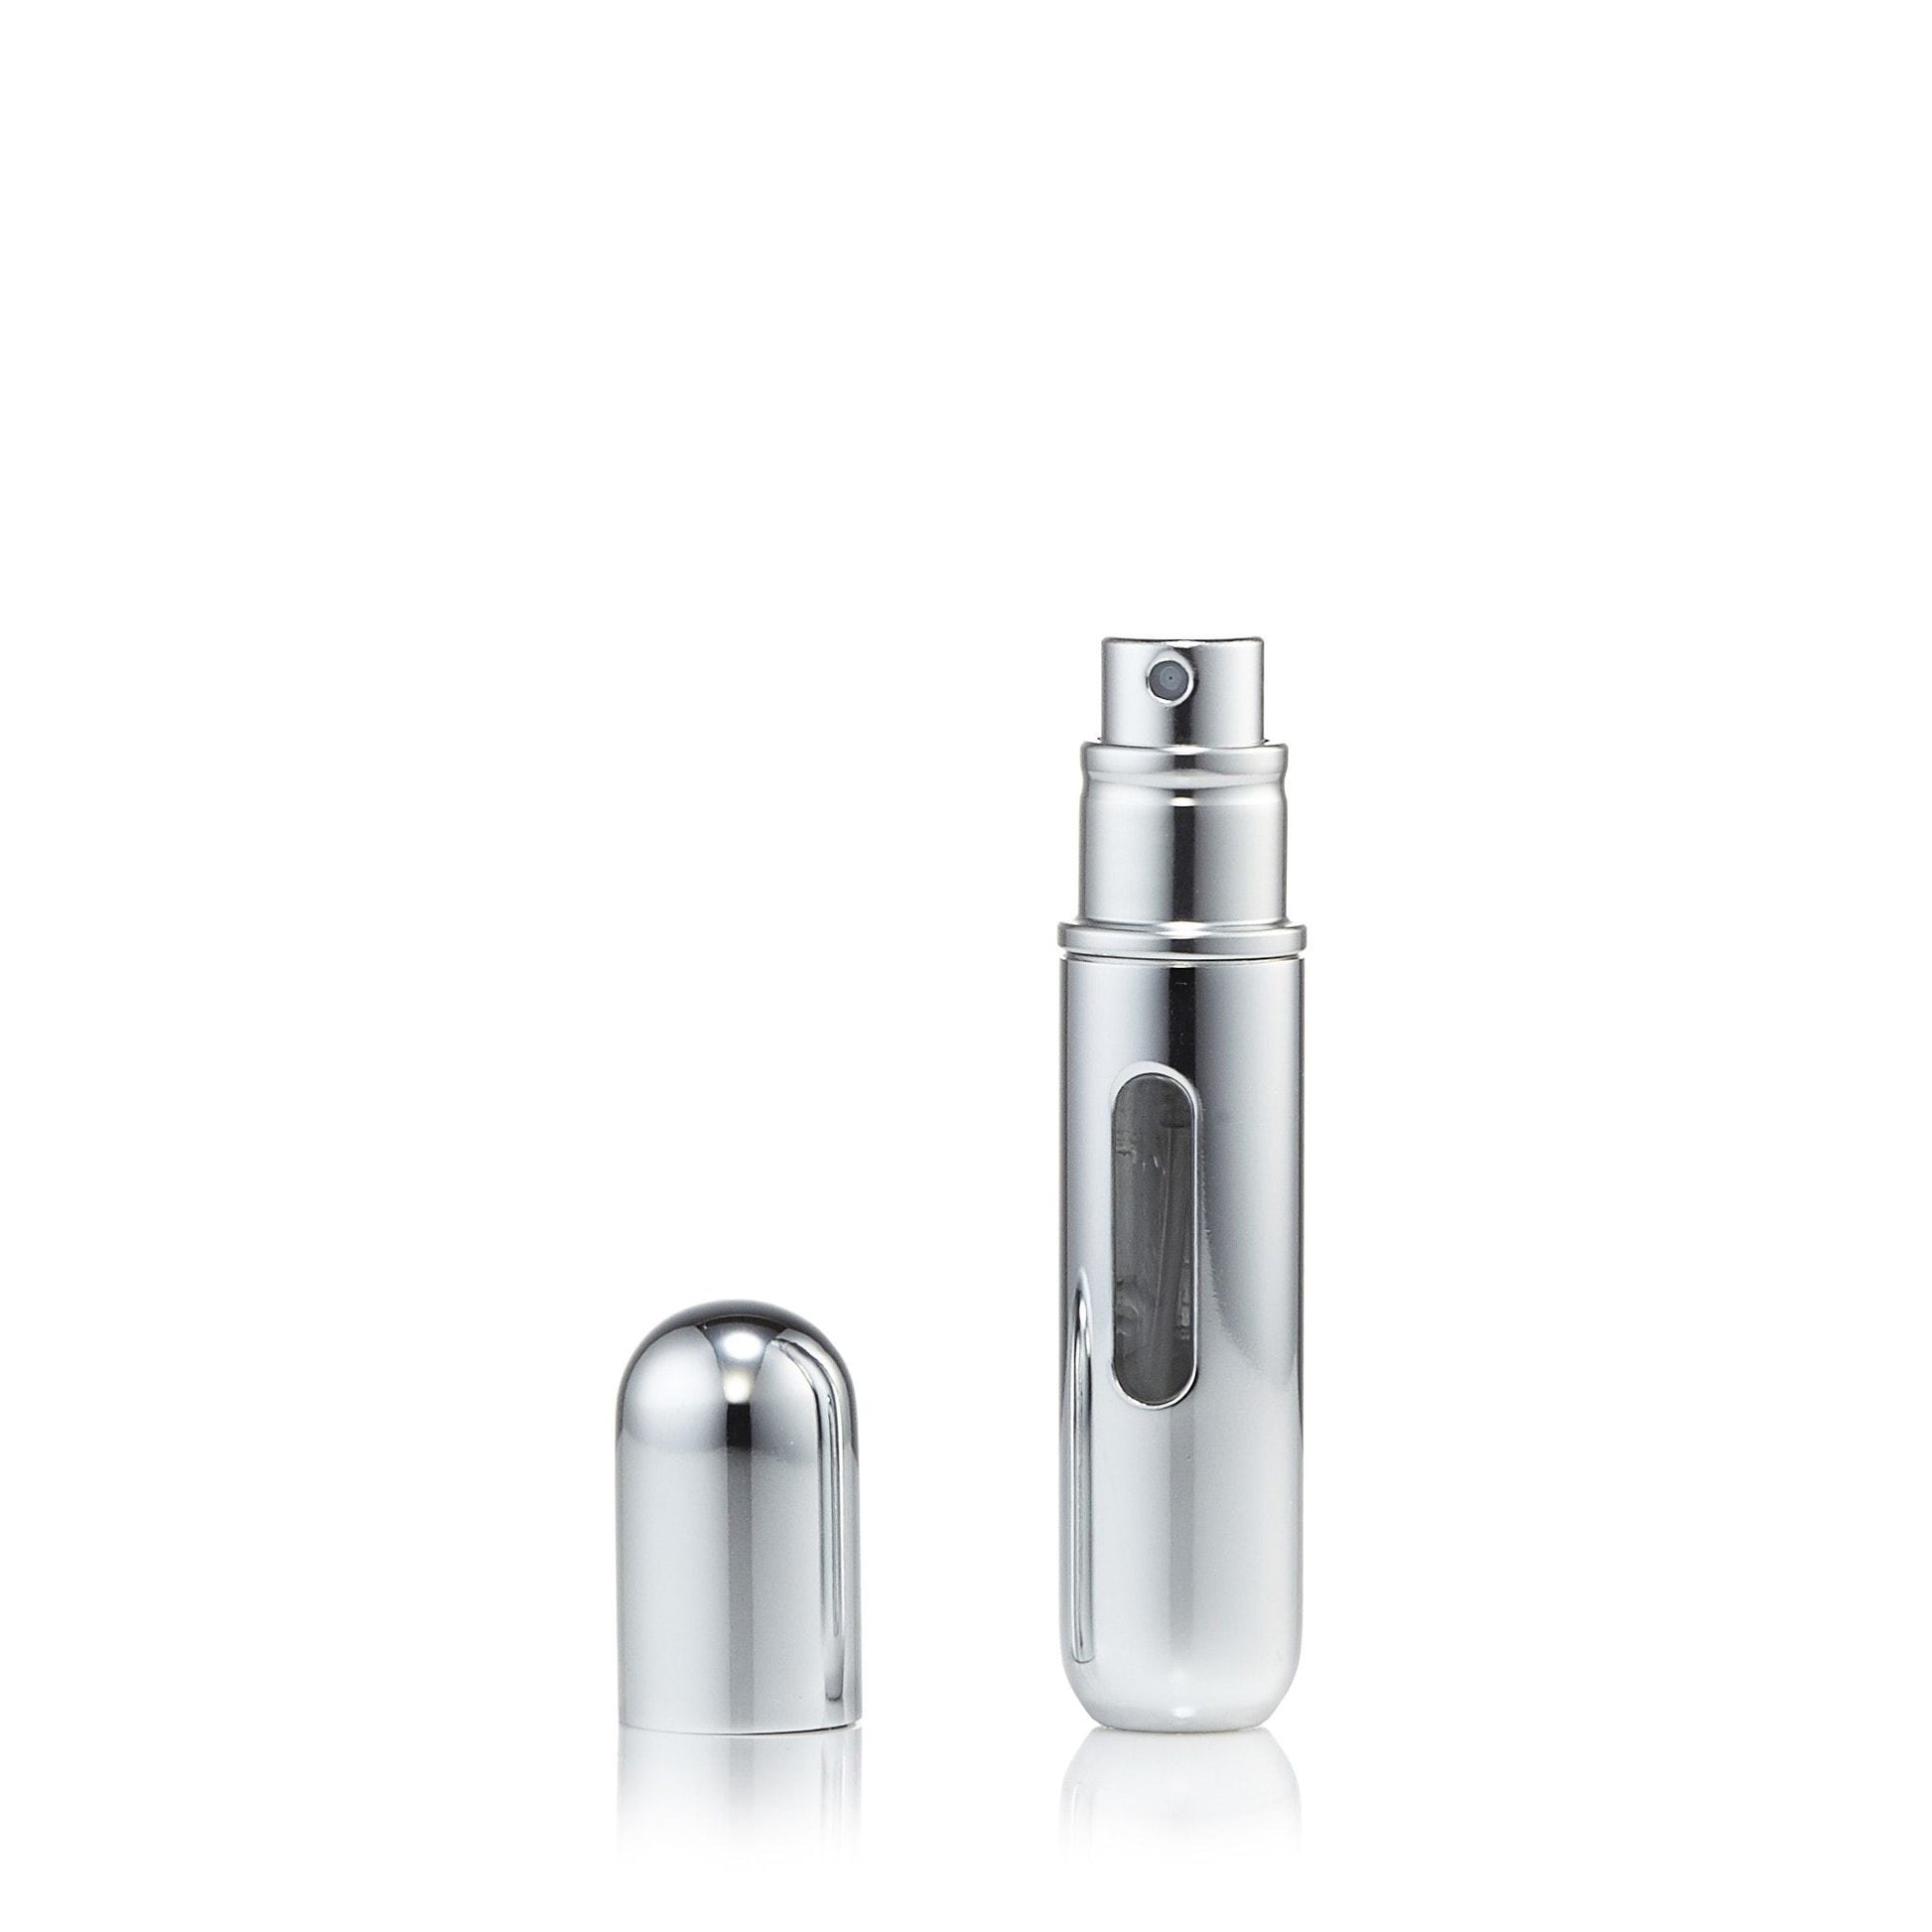 Pump and Fill Fragrance Atomizer by Flo, Product image 4